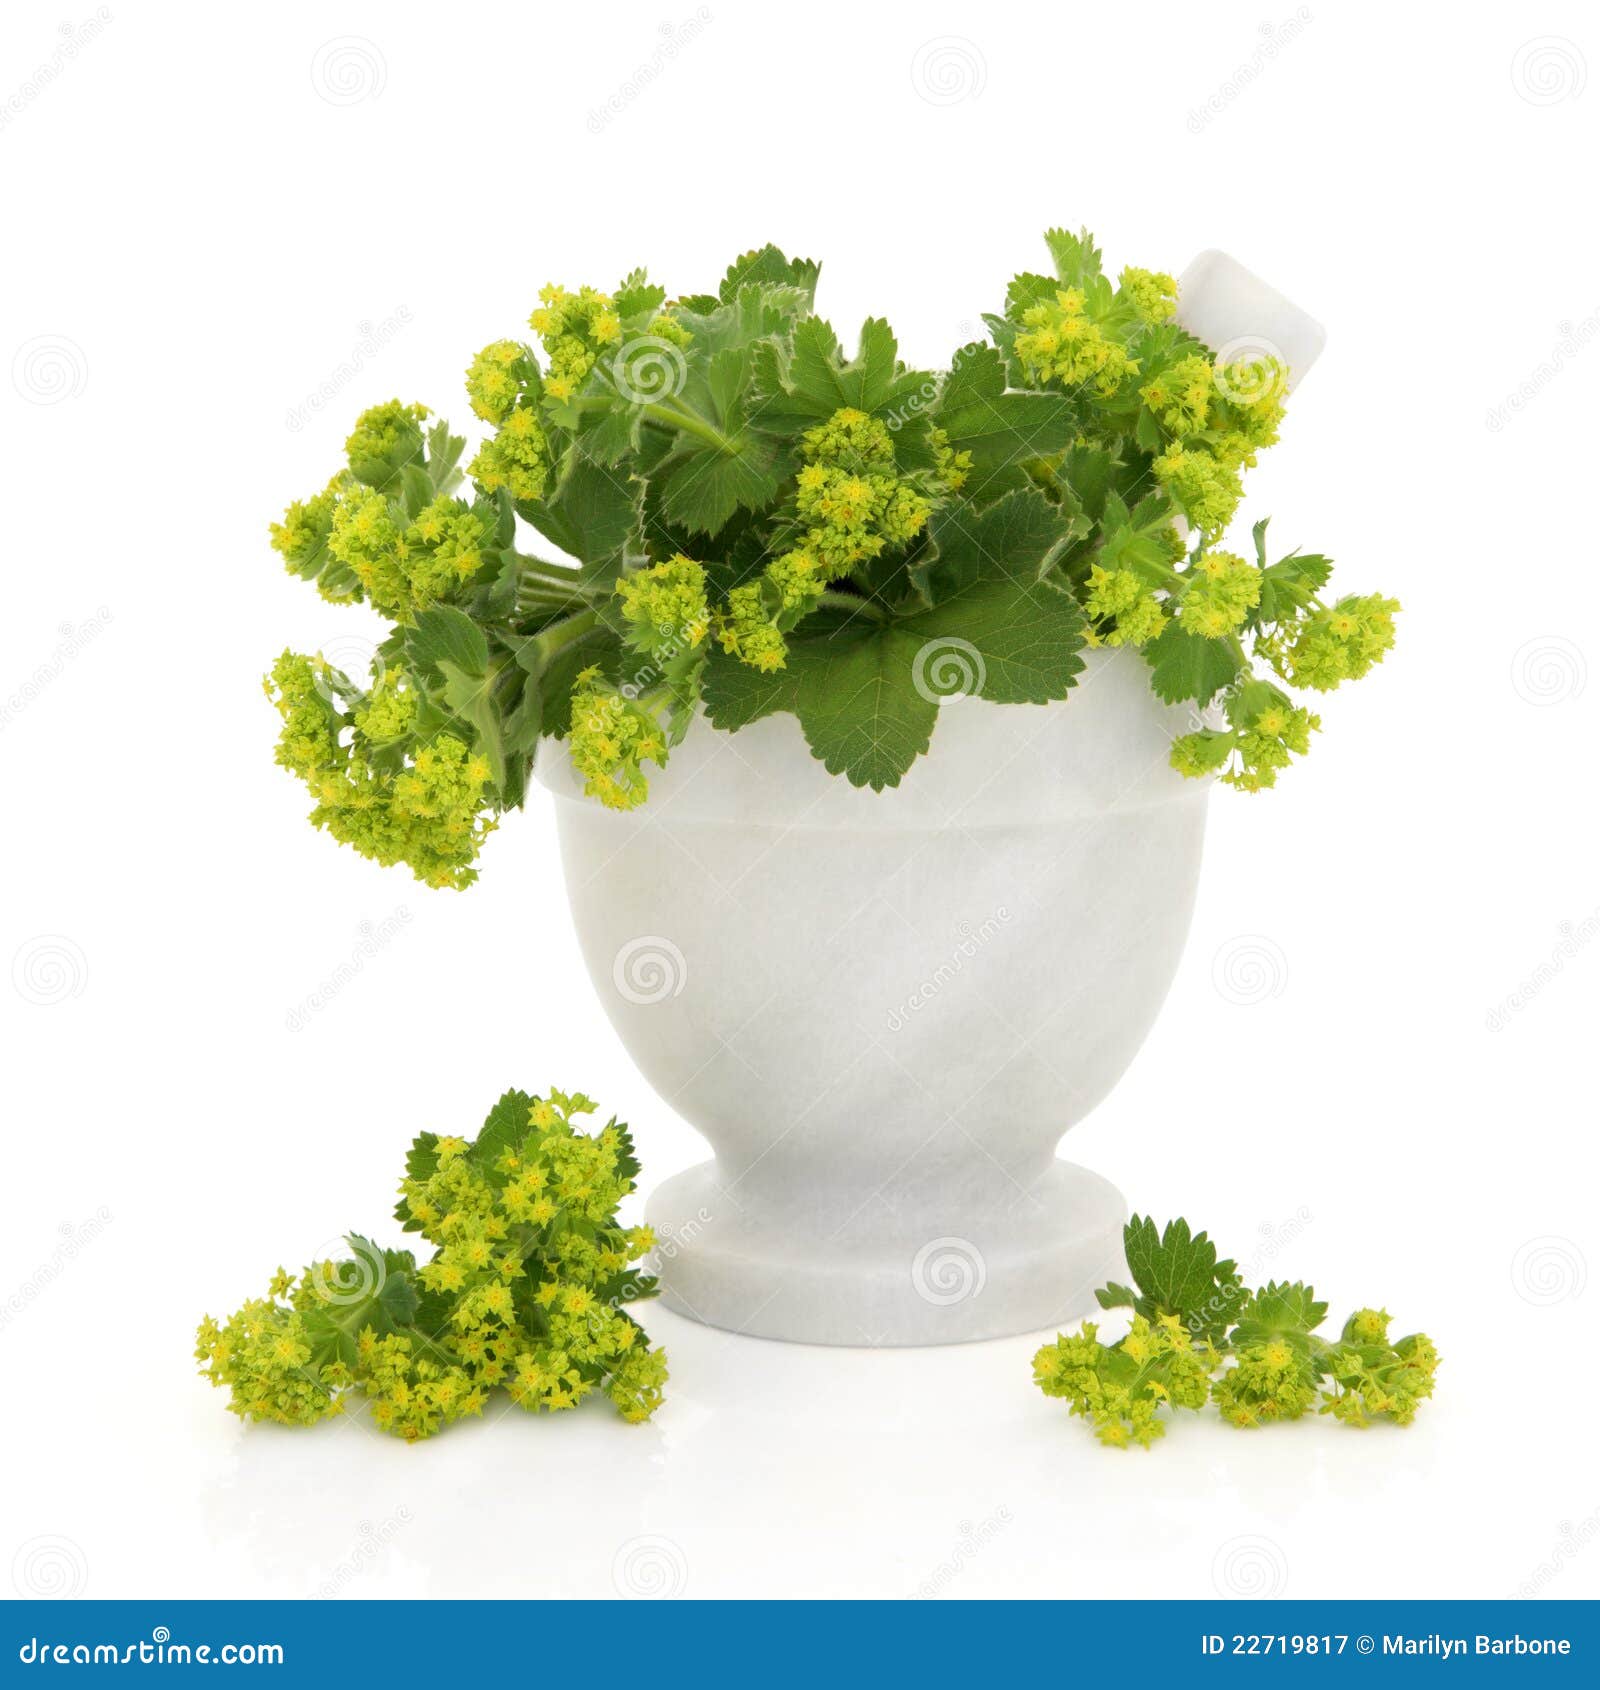 Ladies mantle herb flower sprigs in a marble mortar with pestle with 